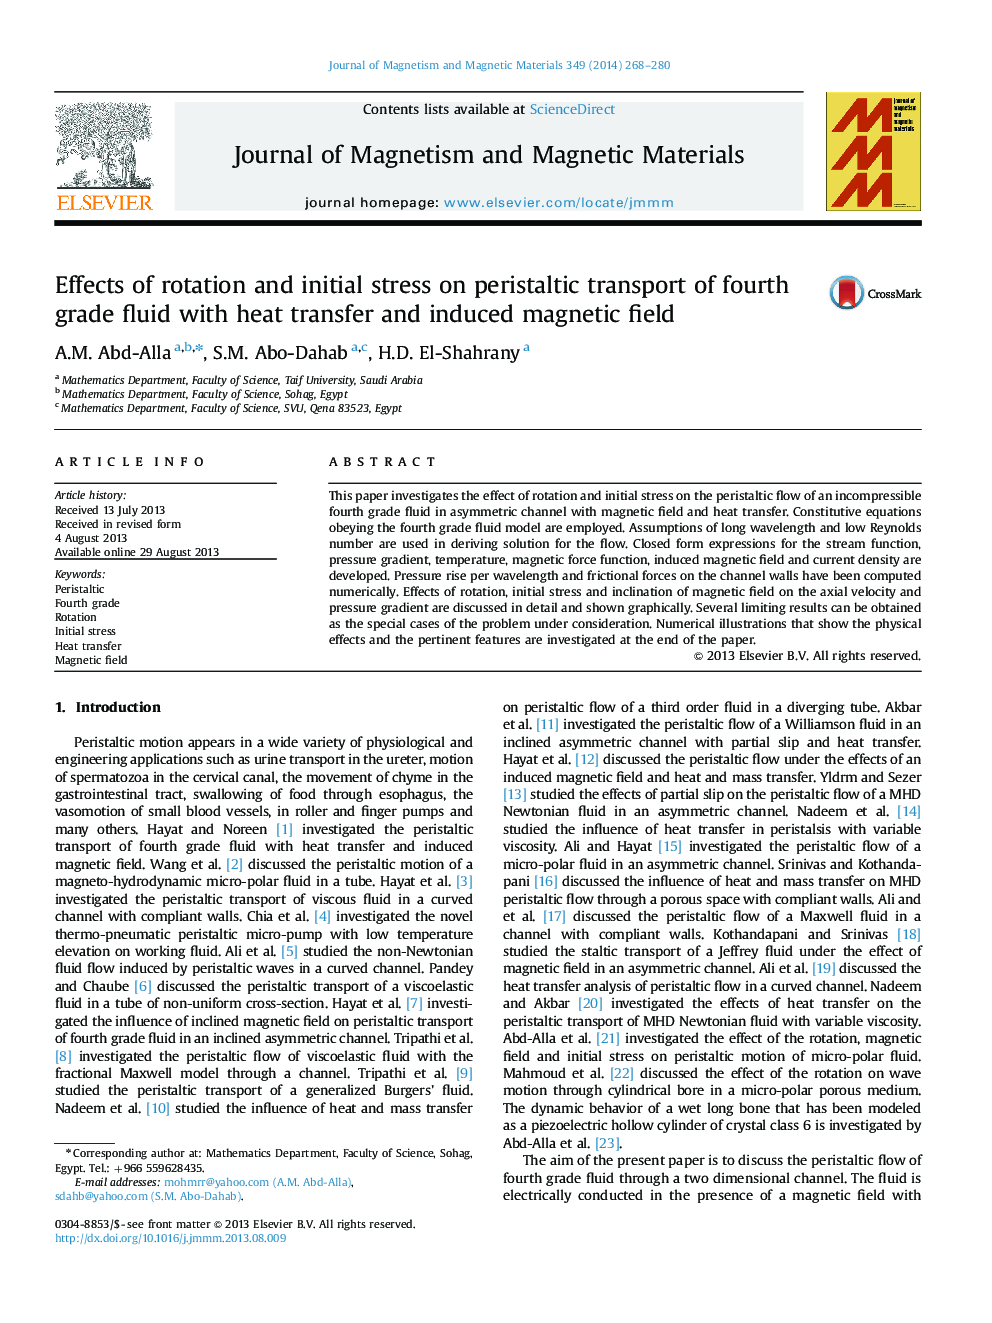 Effects of rotation and initial stress on peristaltic transport of fourth grade fluid with heat transfer and induced magnetic field